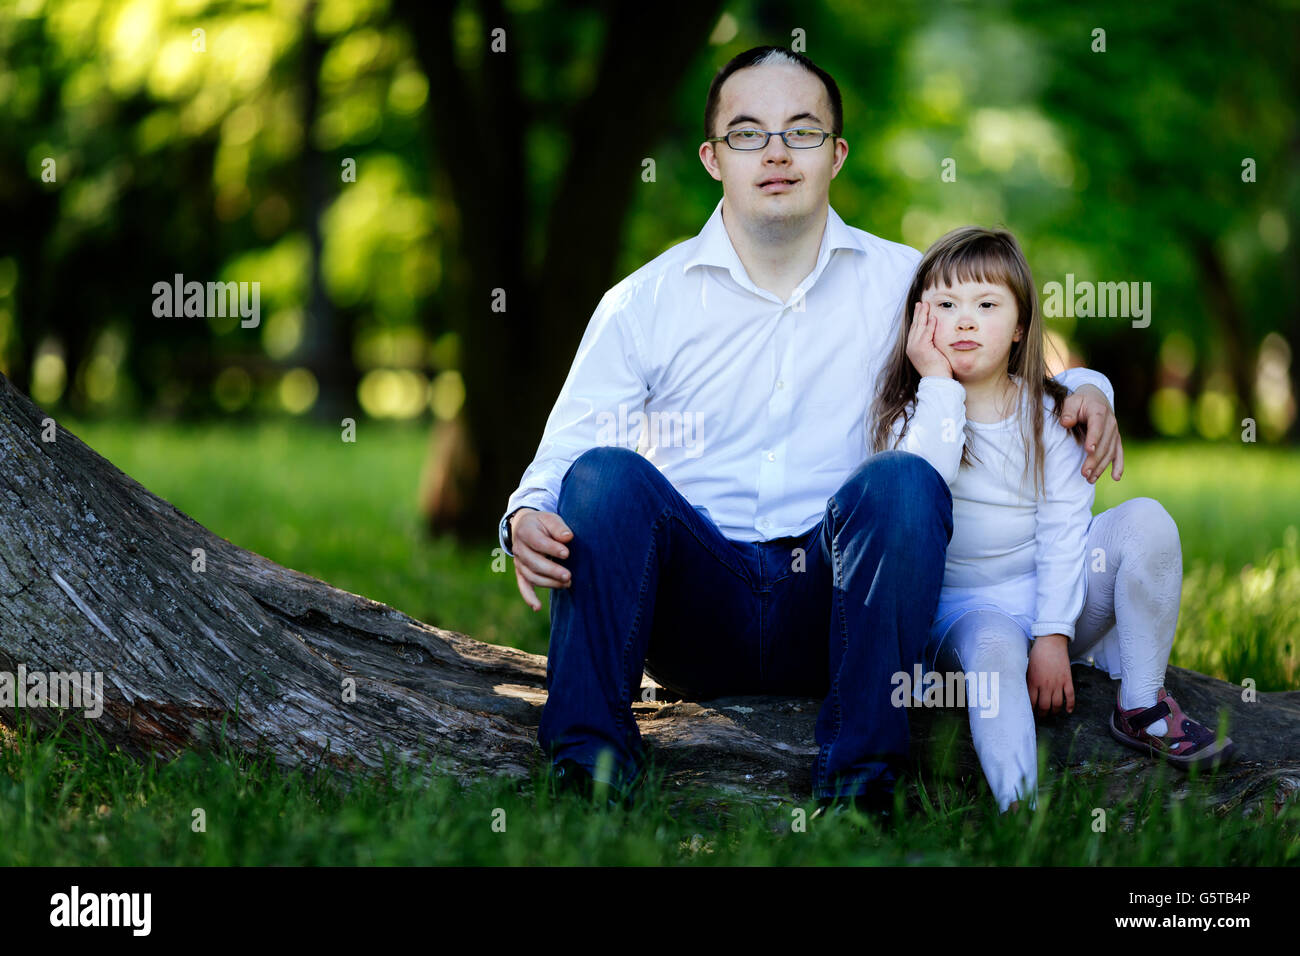 People with down syndrome bonding in nature Stock Photo